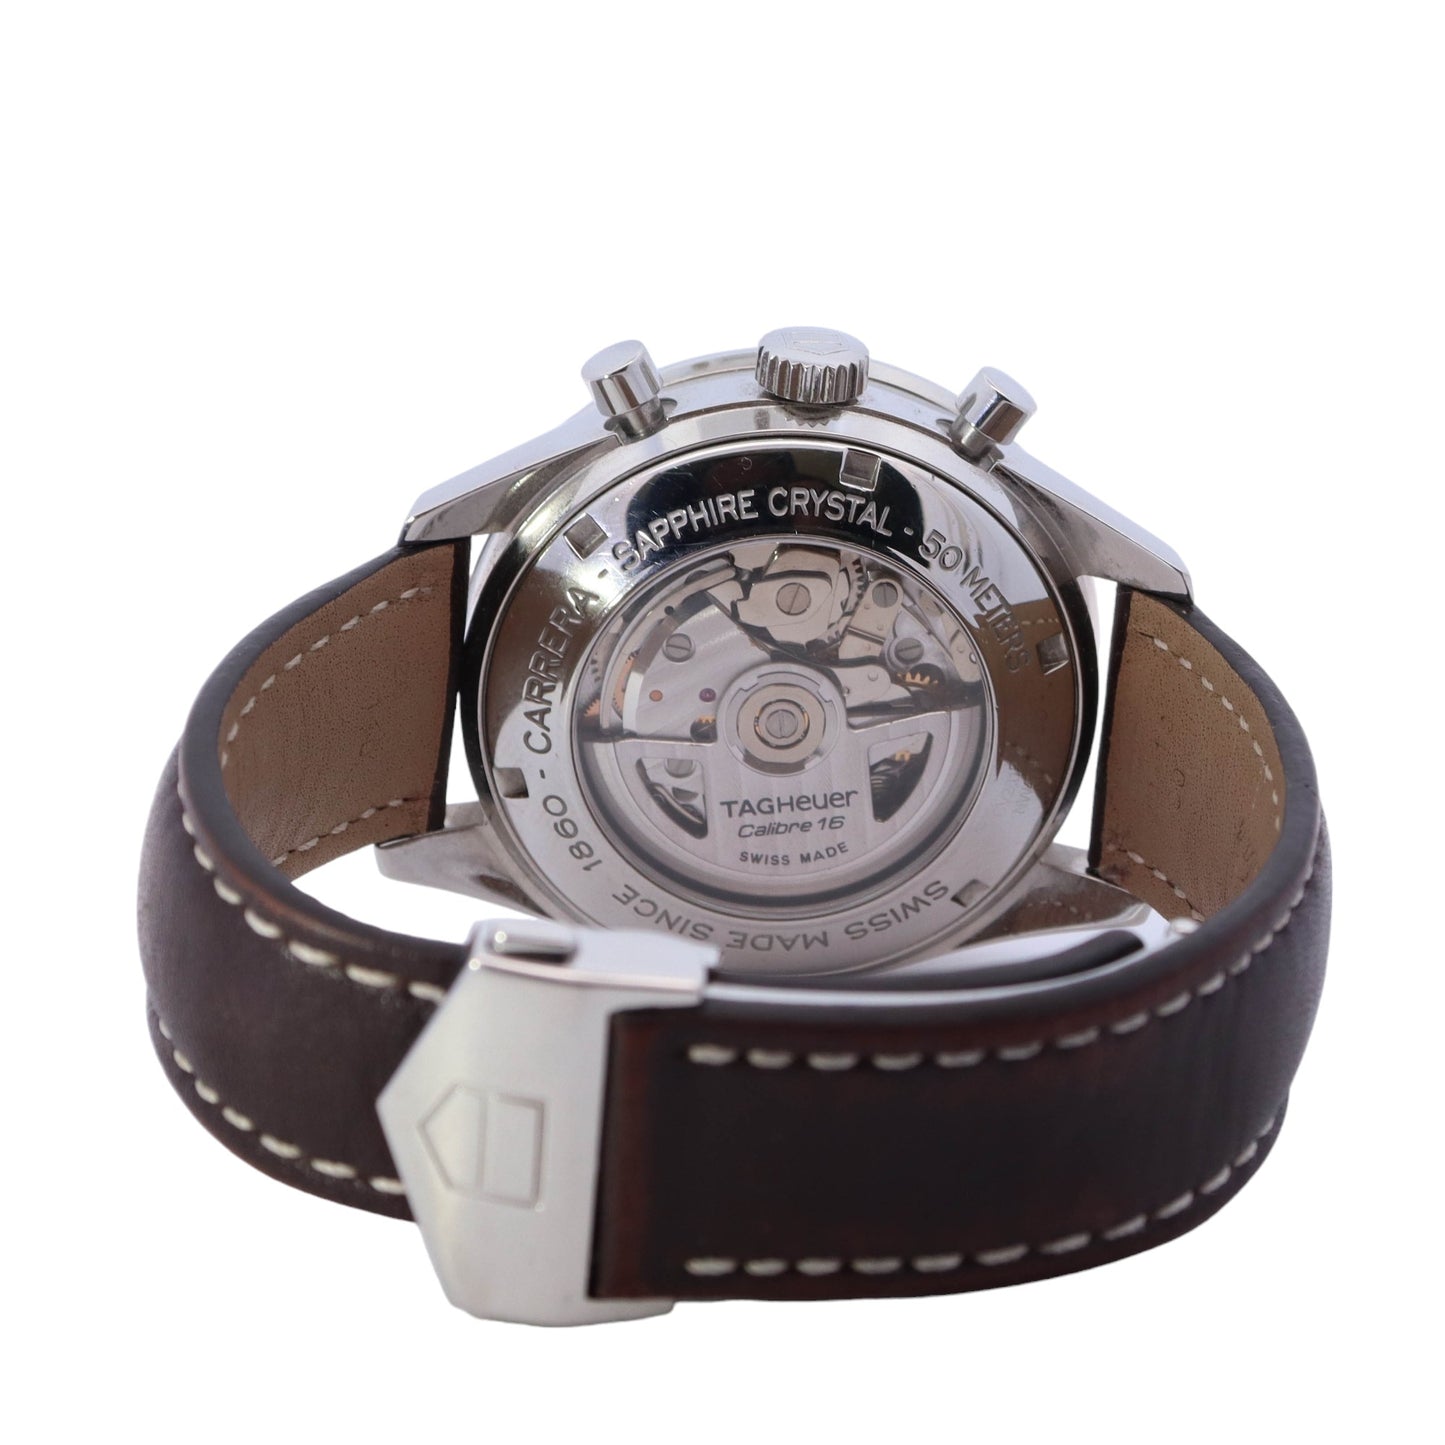 Tag Heuer Carerra Calibre 16 Stainless steel 41mm Brown Chronograph Stick Dial Watch Reference #: CV2013-0 - Happy Jewelers Fine Jewelry Lifetime Warranty